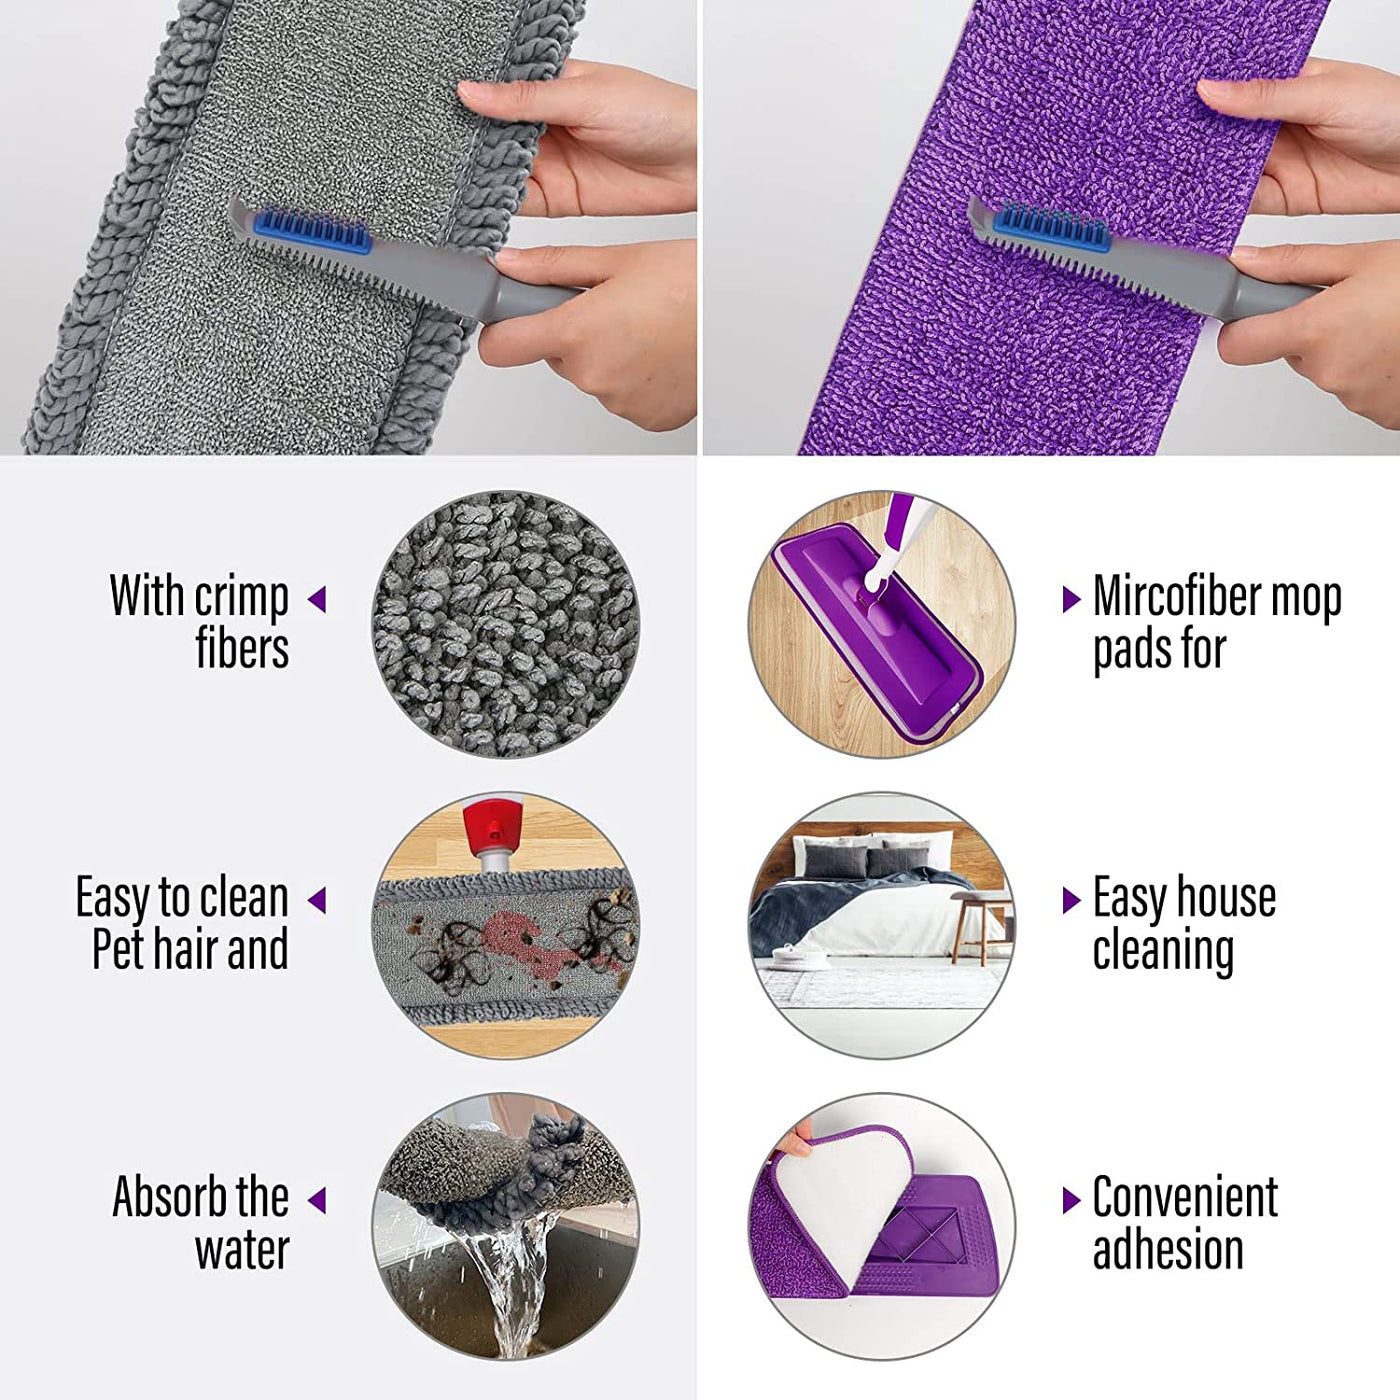  Wet Spray Mop with a Refillable Spray Bottle and 3 Washable Microfiber Pads